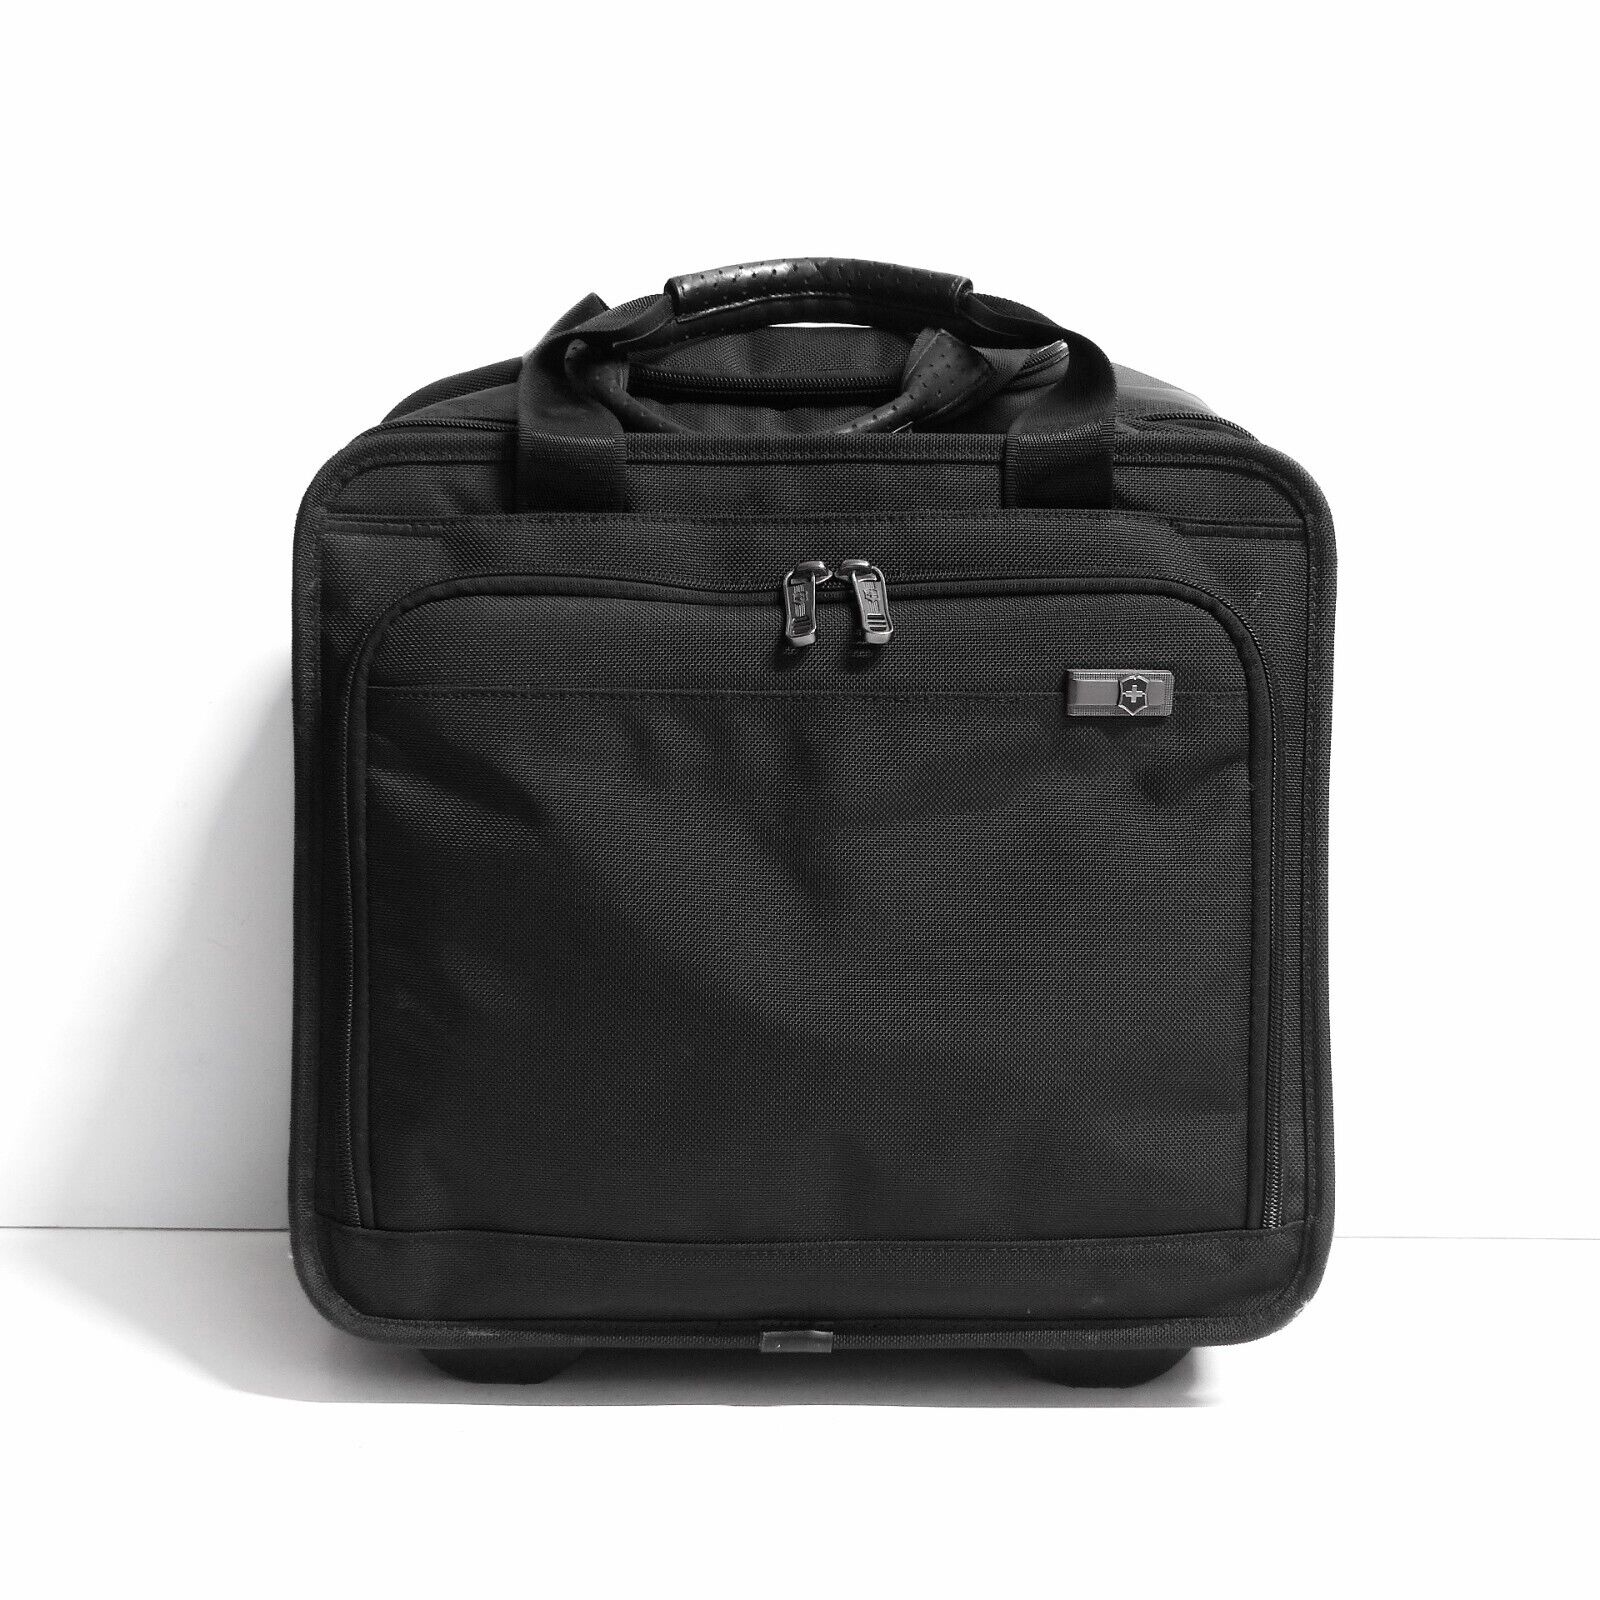 Victorinox Professional Rolling Laptop/ Business Bag Carry on Luggage Black